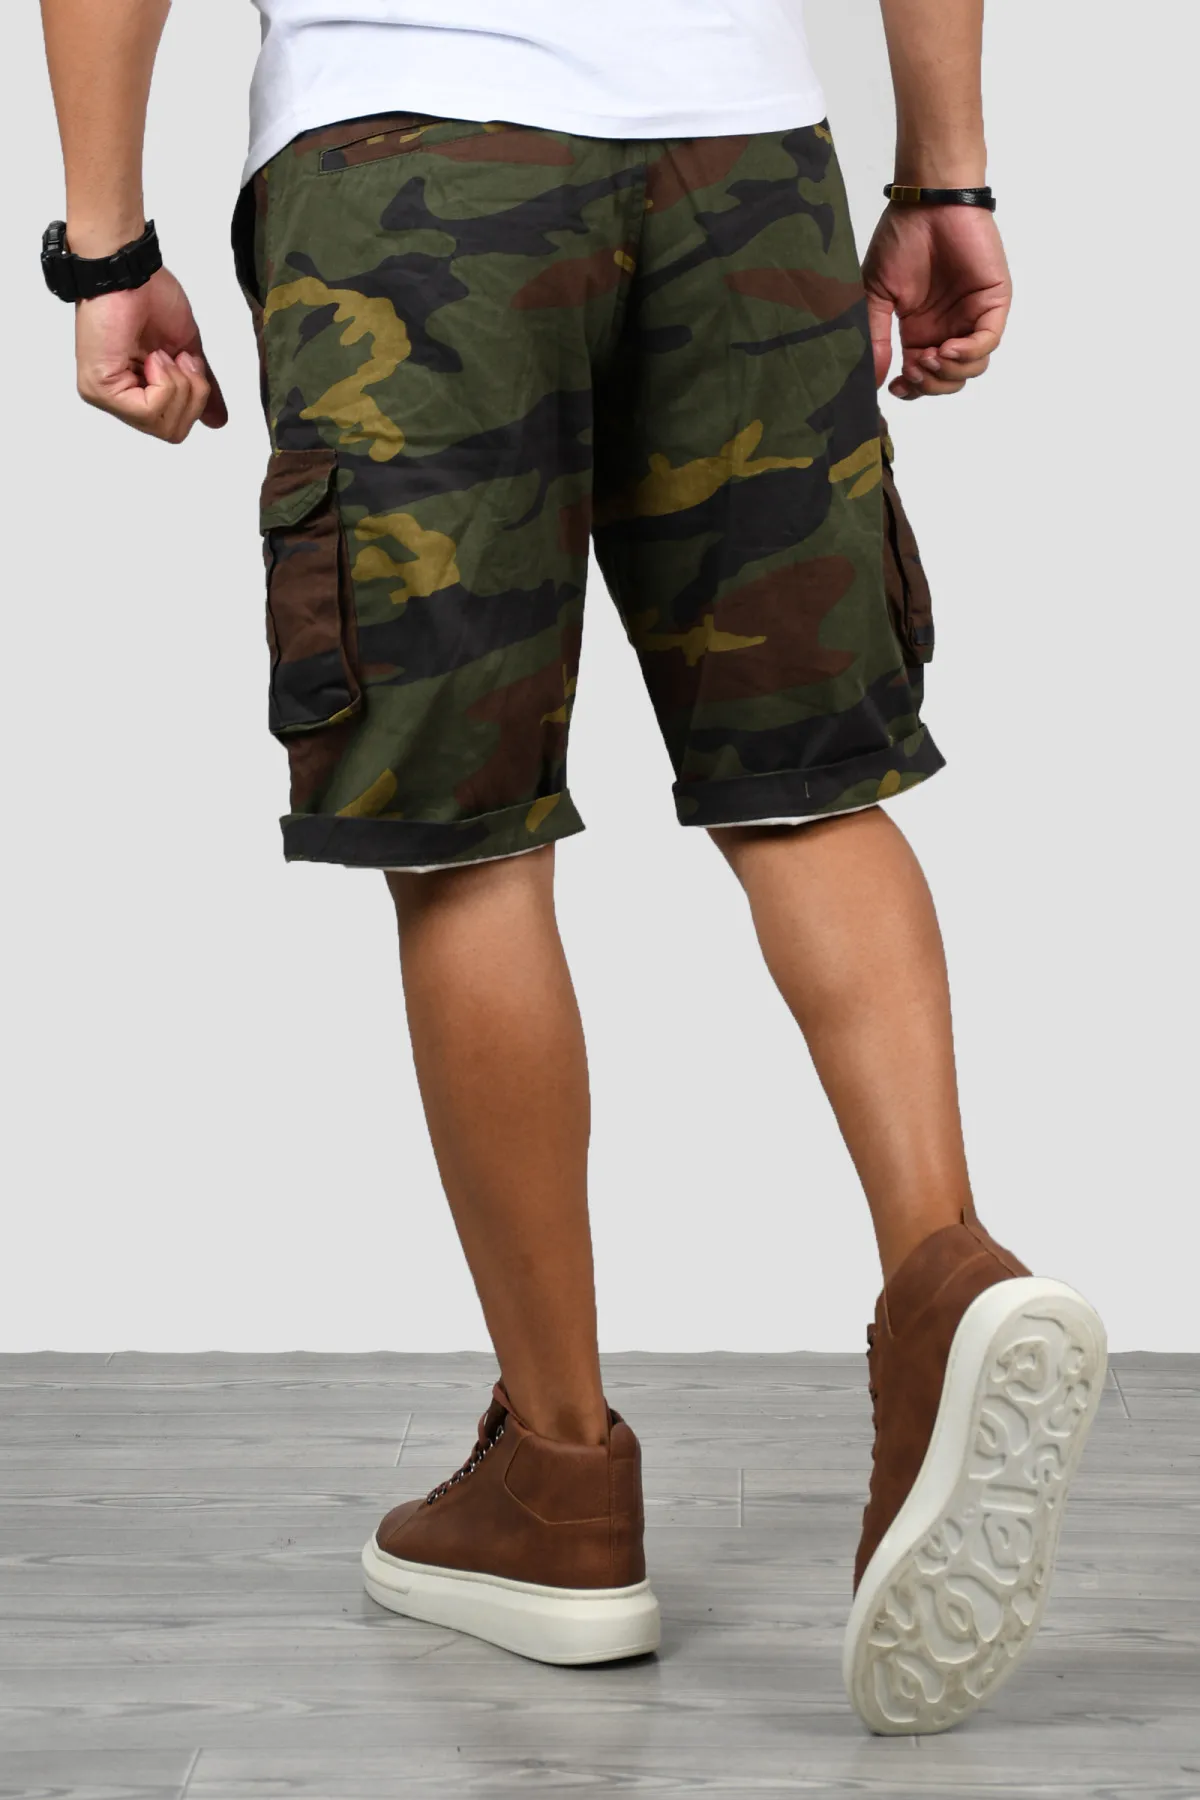 

DeepSEA Male Green-Coffee Short Cotton Shorts Camouflage Cargo Pants Slim Fit Cotton Street Wear Summer Casual For Male 2012014